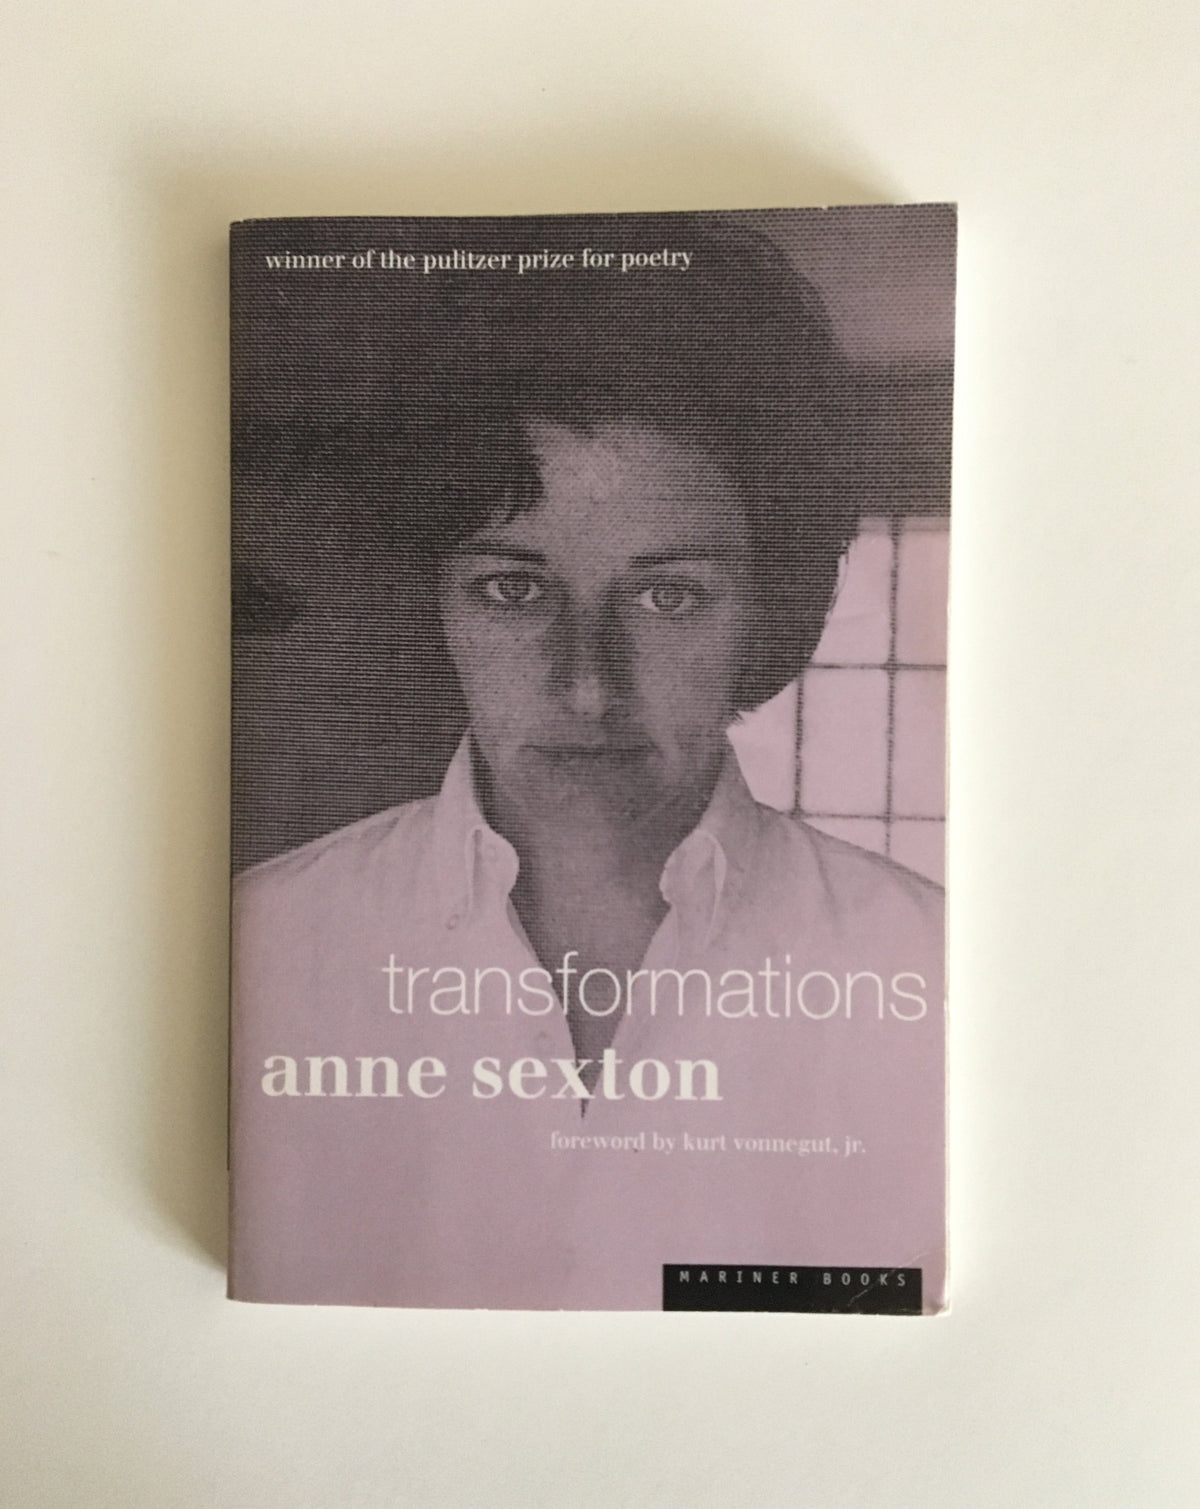 DONATE: Transformations by Anne Sexton